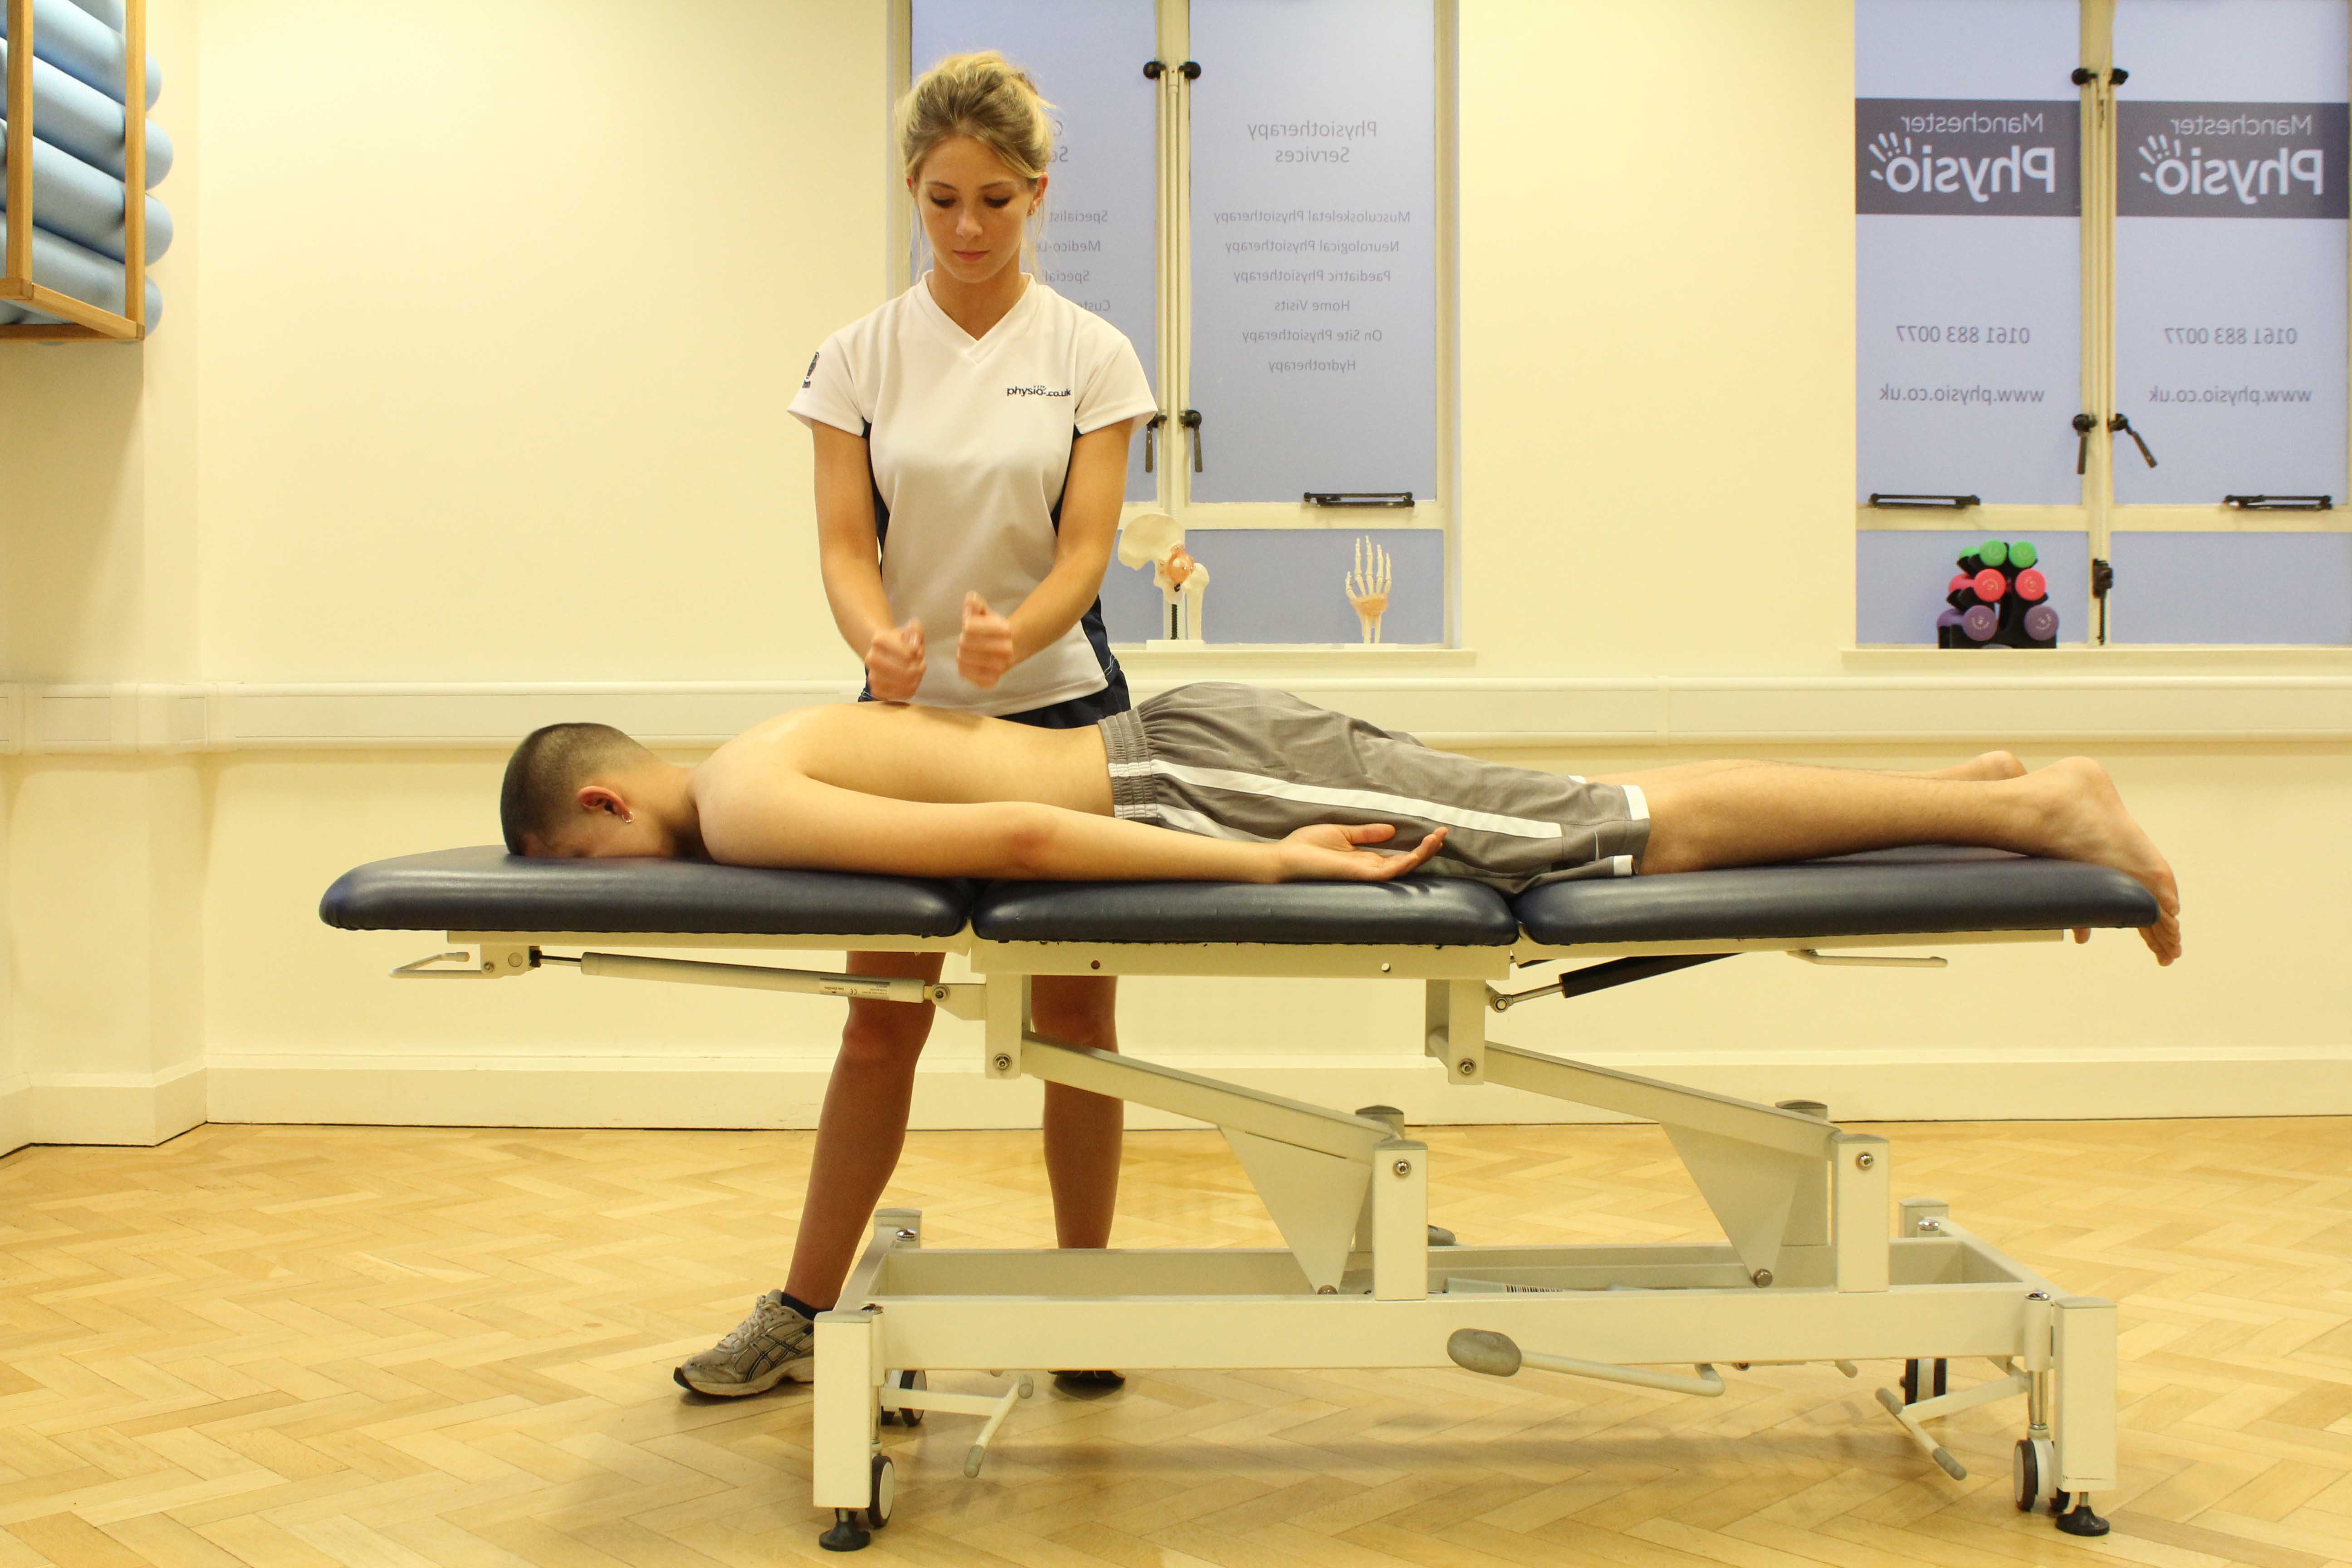 Beating percussion massage technique applied to latissimus dorsi muscle